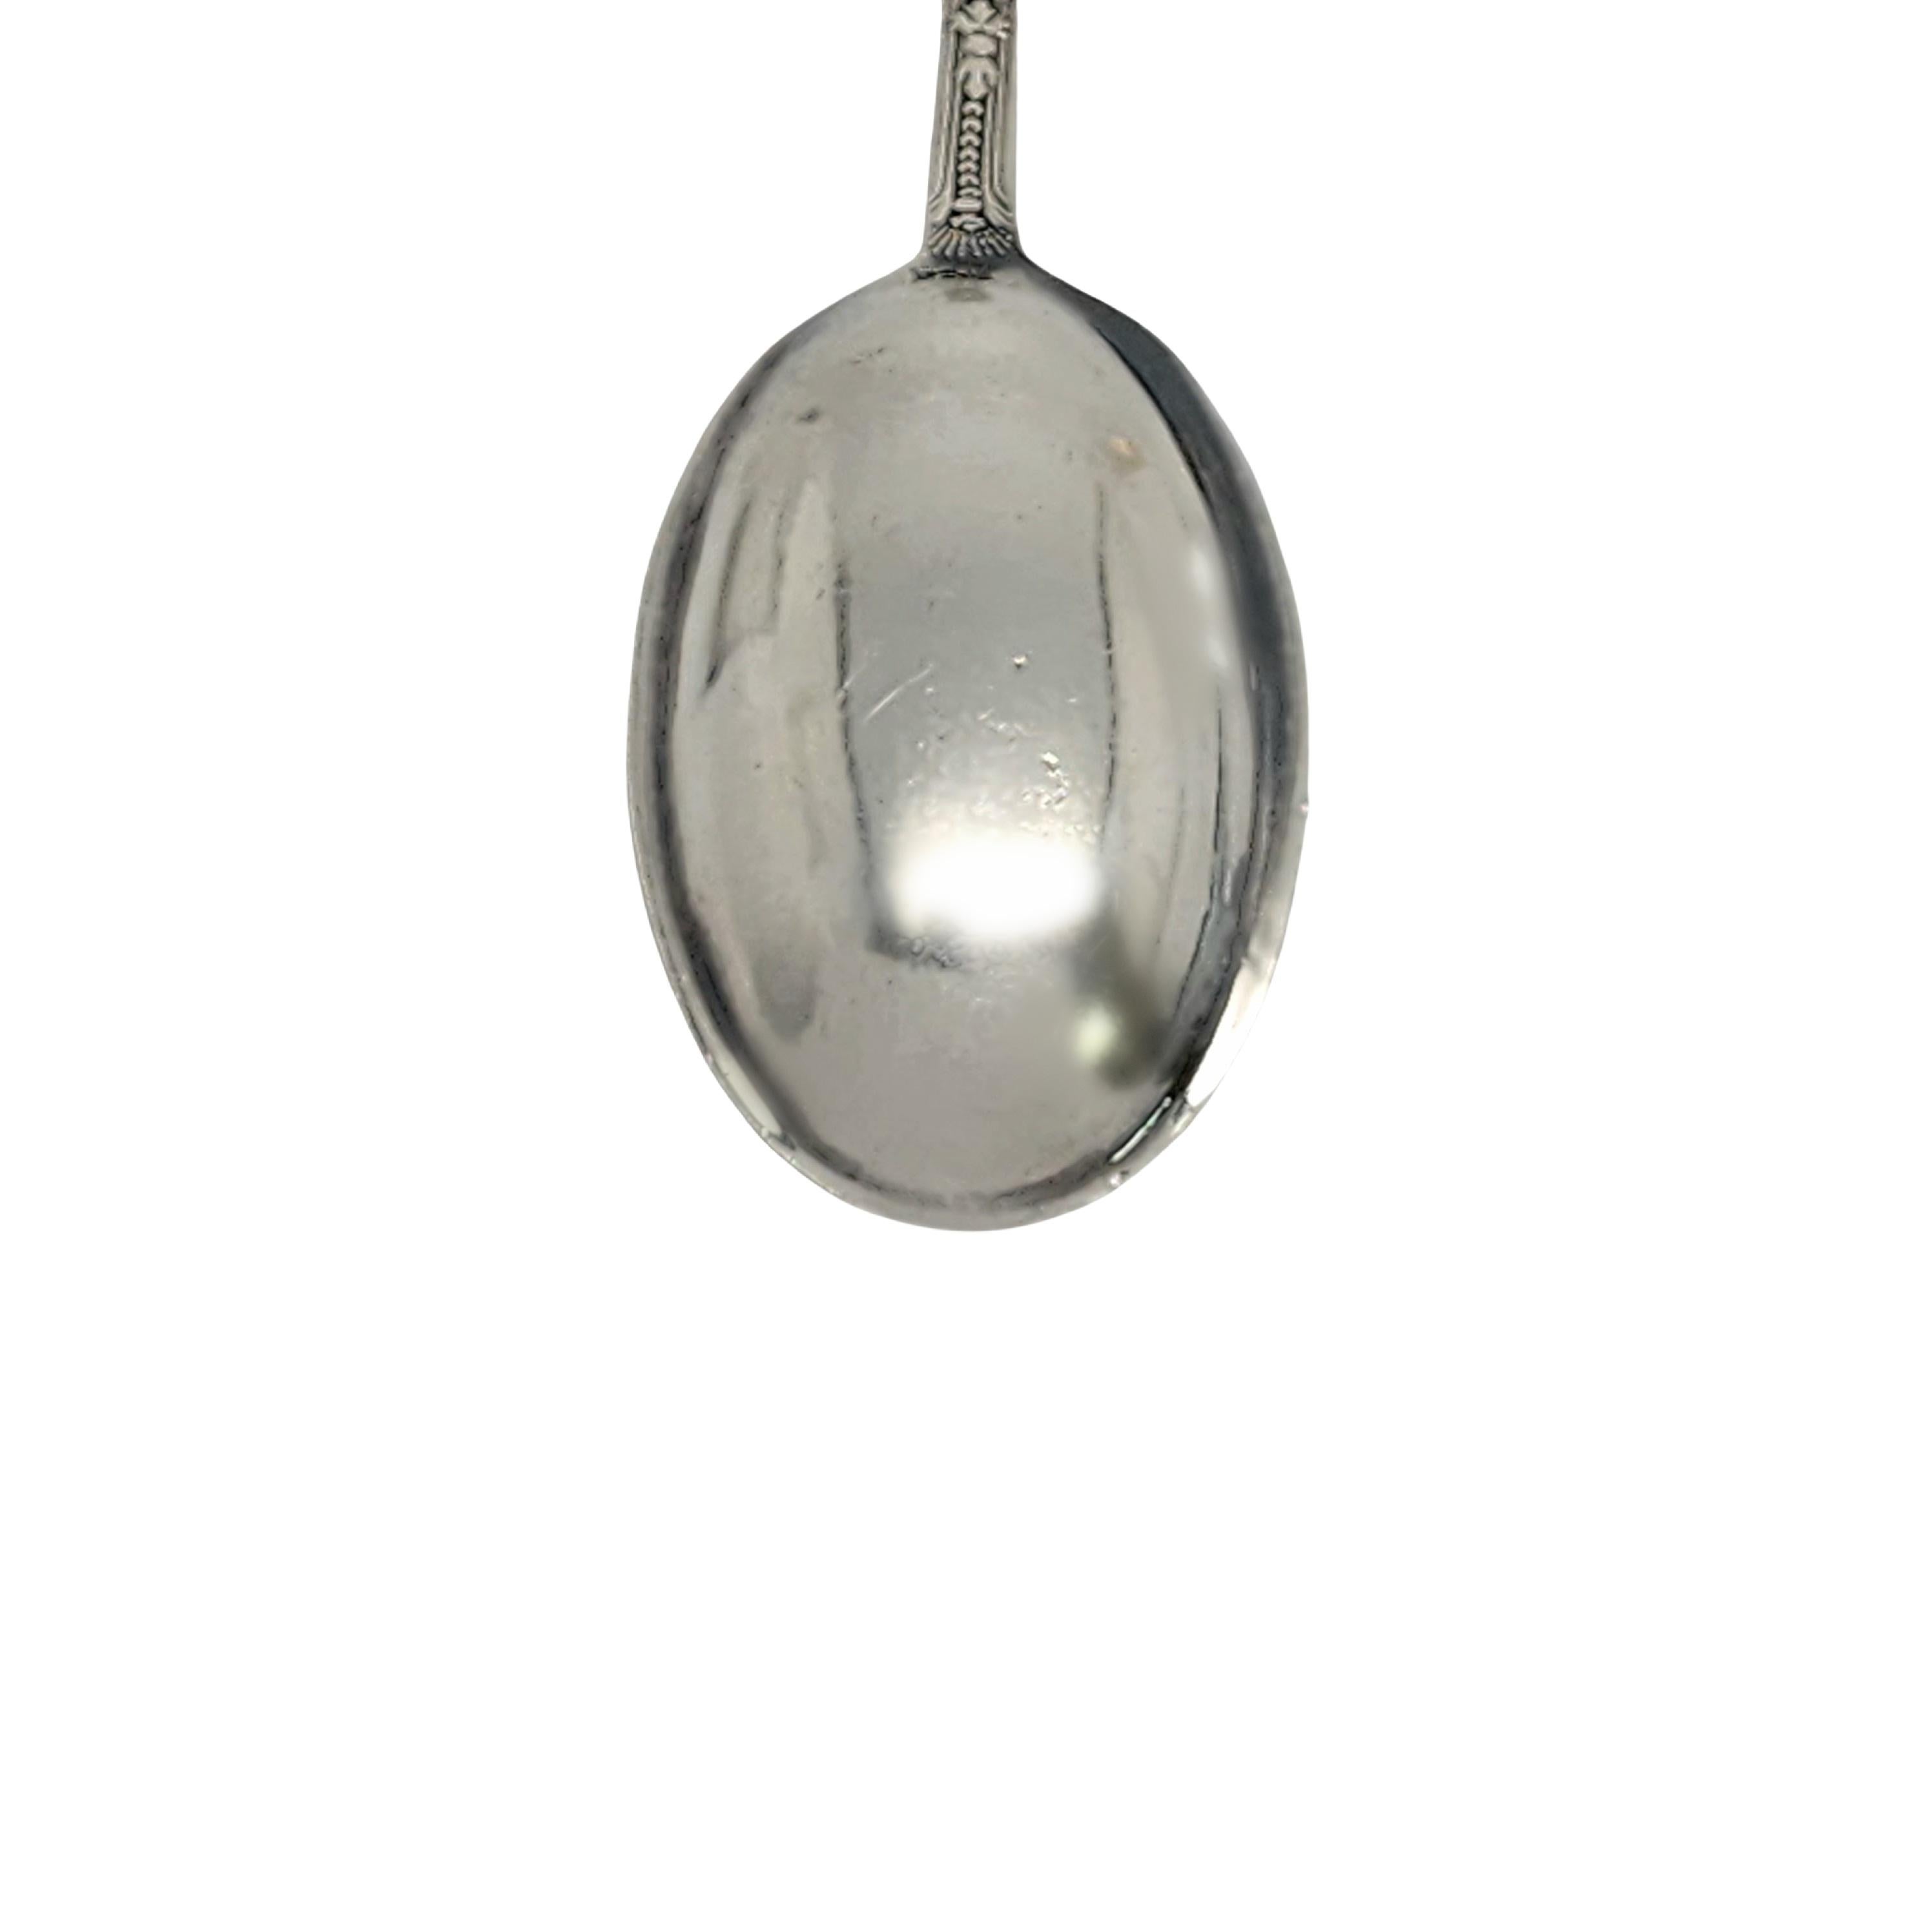 Gorham Versailles Sterling Silver Pap Spoon In Good Condition For Sale In Washington Depot, CT